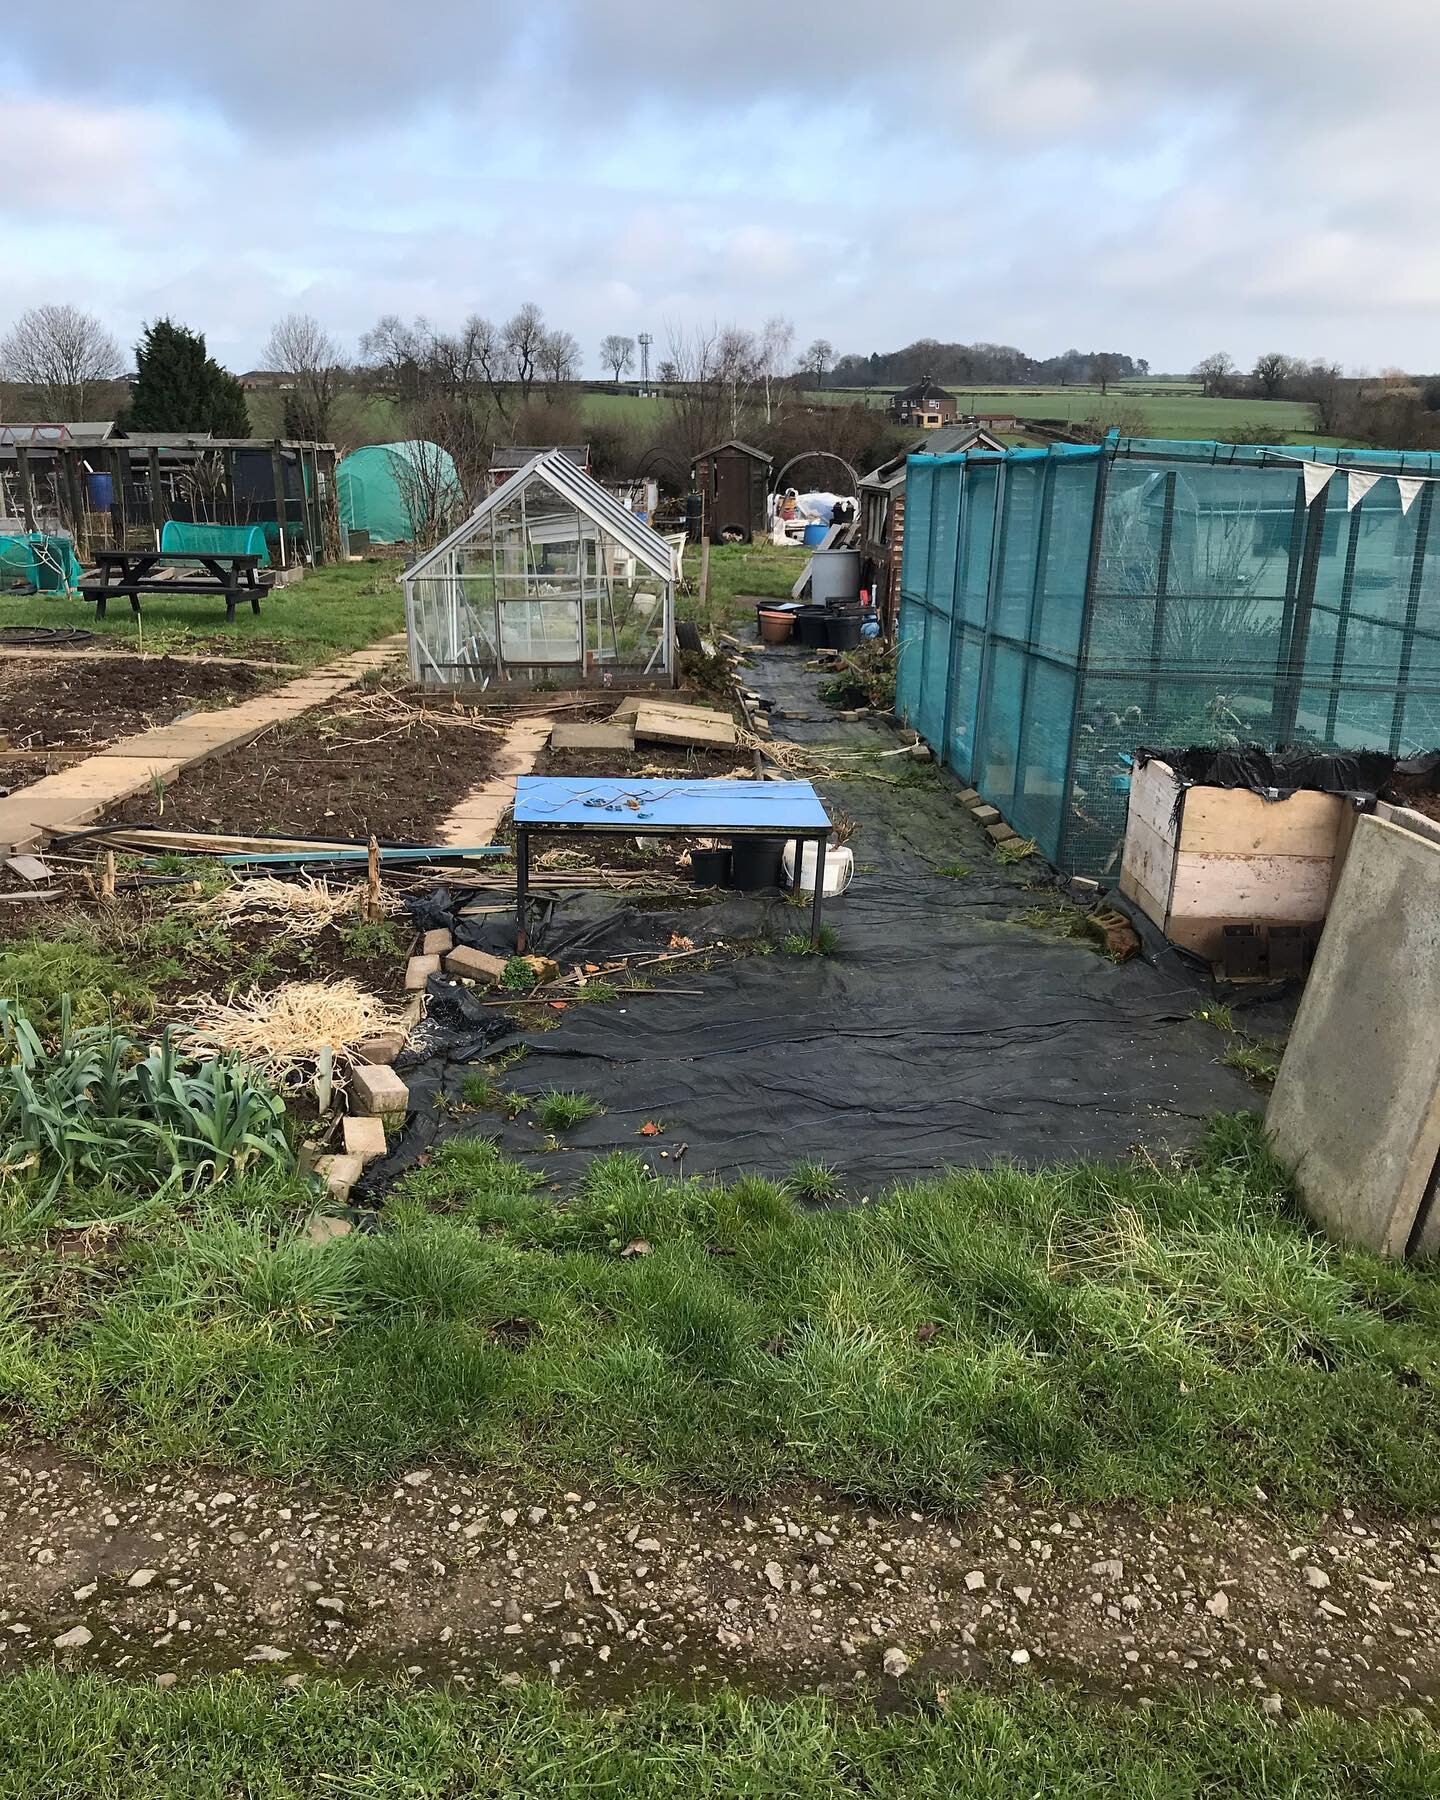 The allotment has been tended to for the first time in nearly 3 months. 

There are a lot of maintenance jobs to be done before the growing season really starts but at least we have a head start this year. We have empty beds, a greenhouse, polytunnel